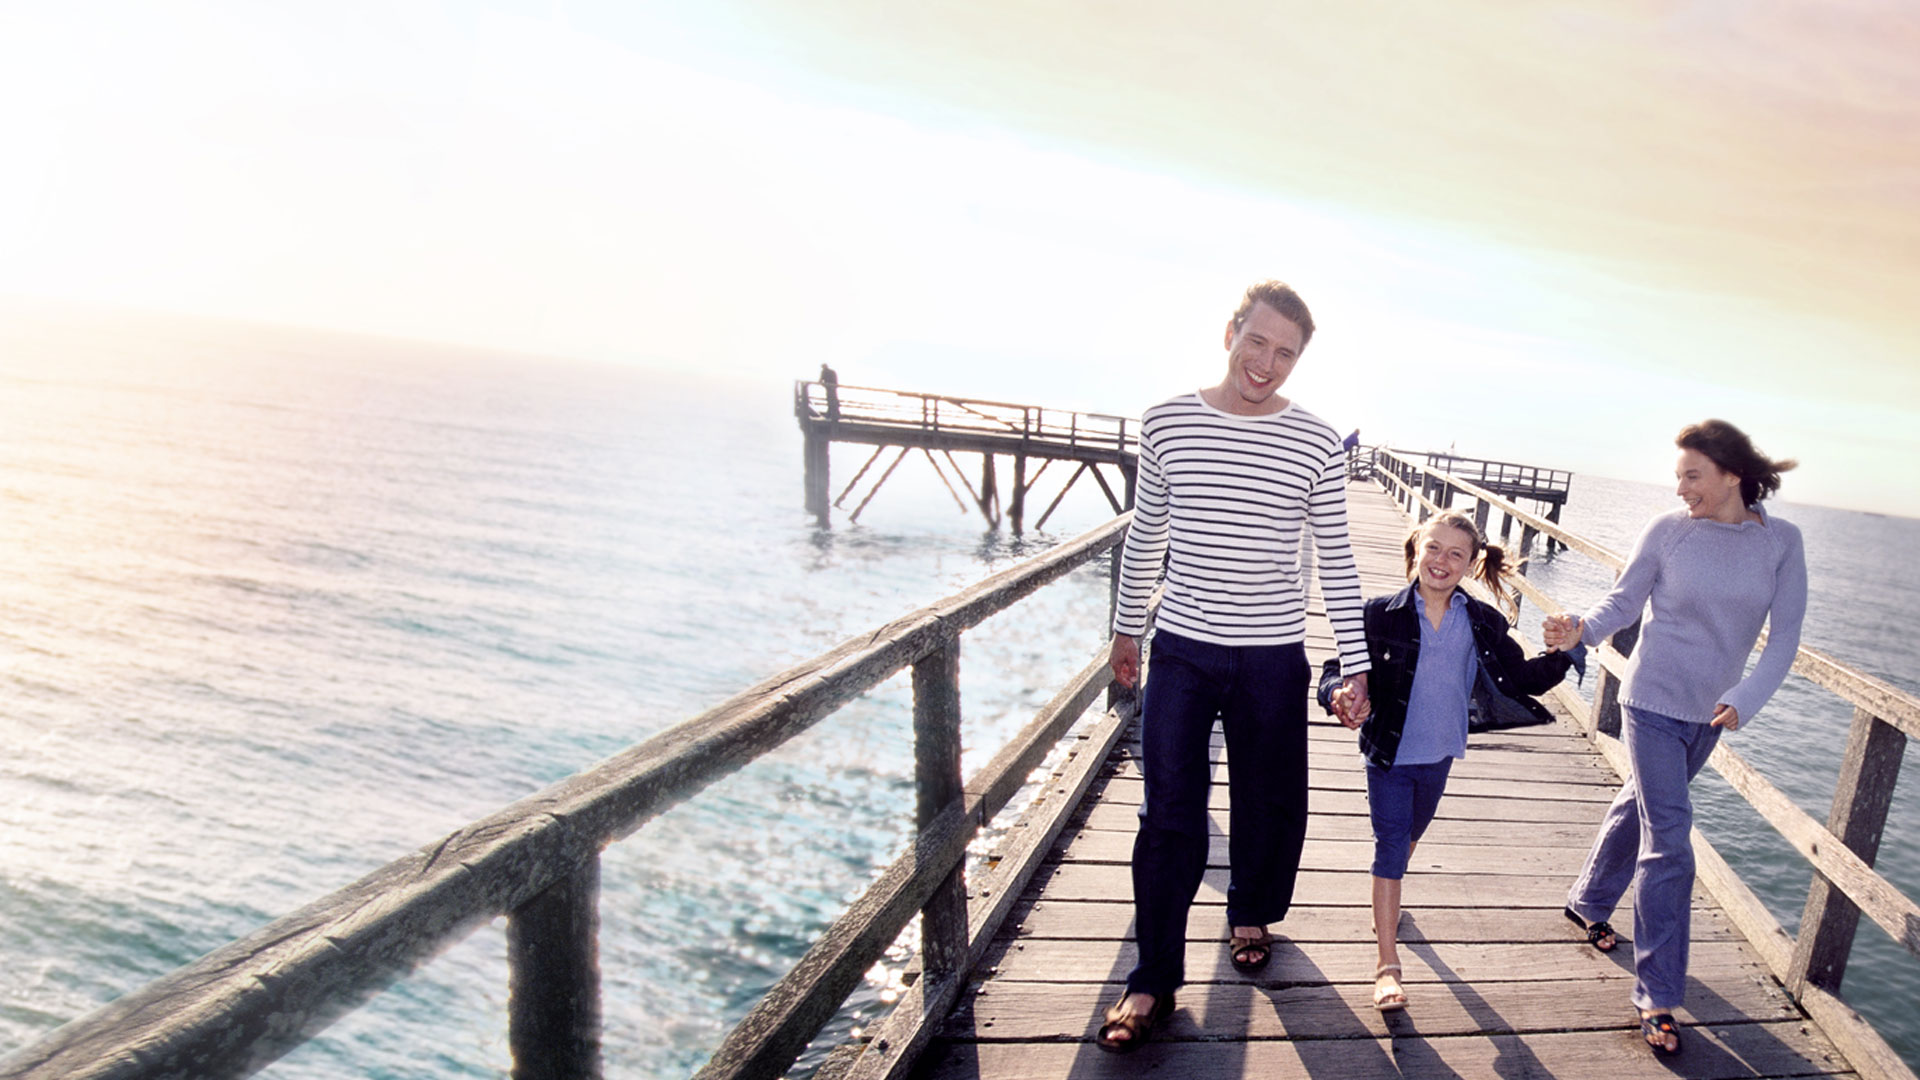 A family of 3 with a young boy walking down a boardwalk in an evening